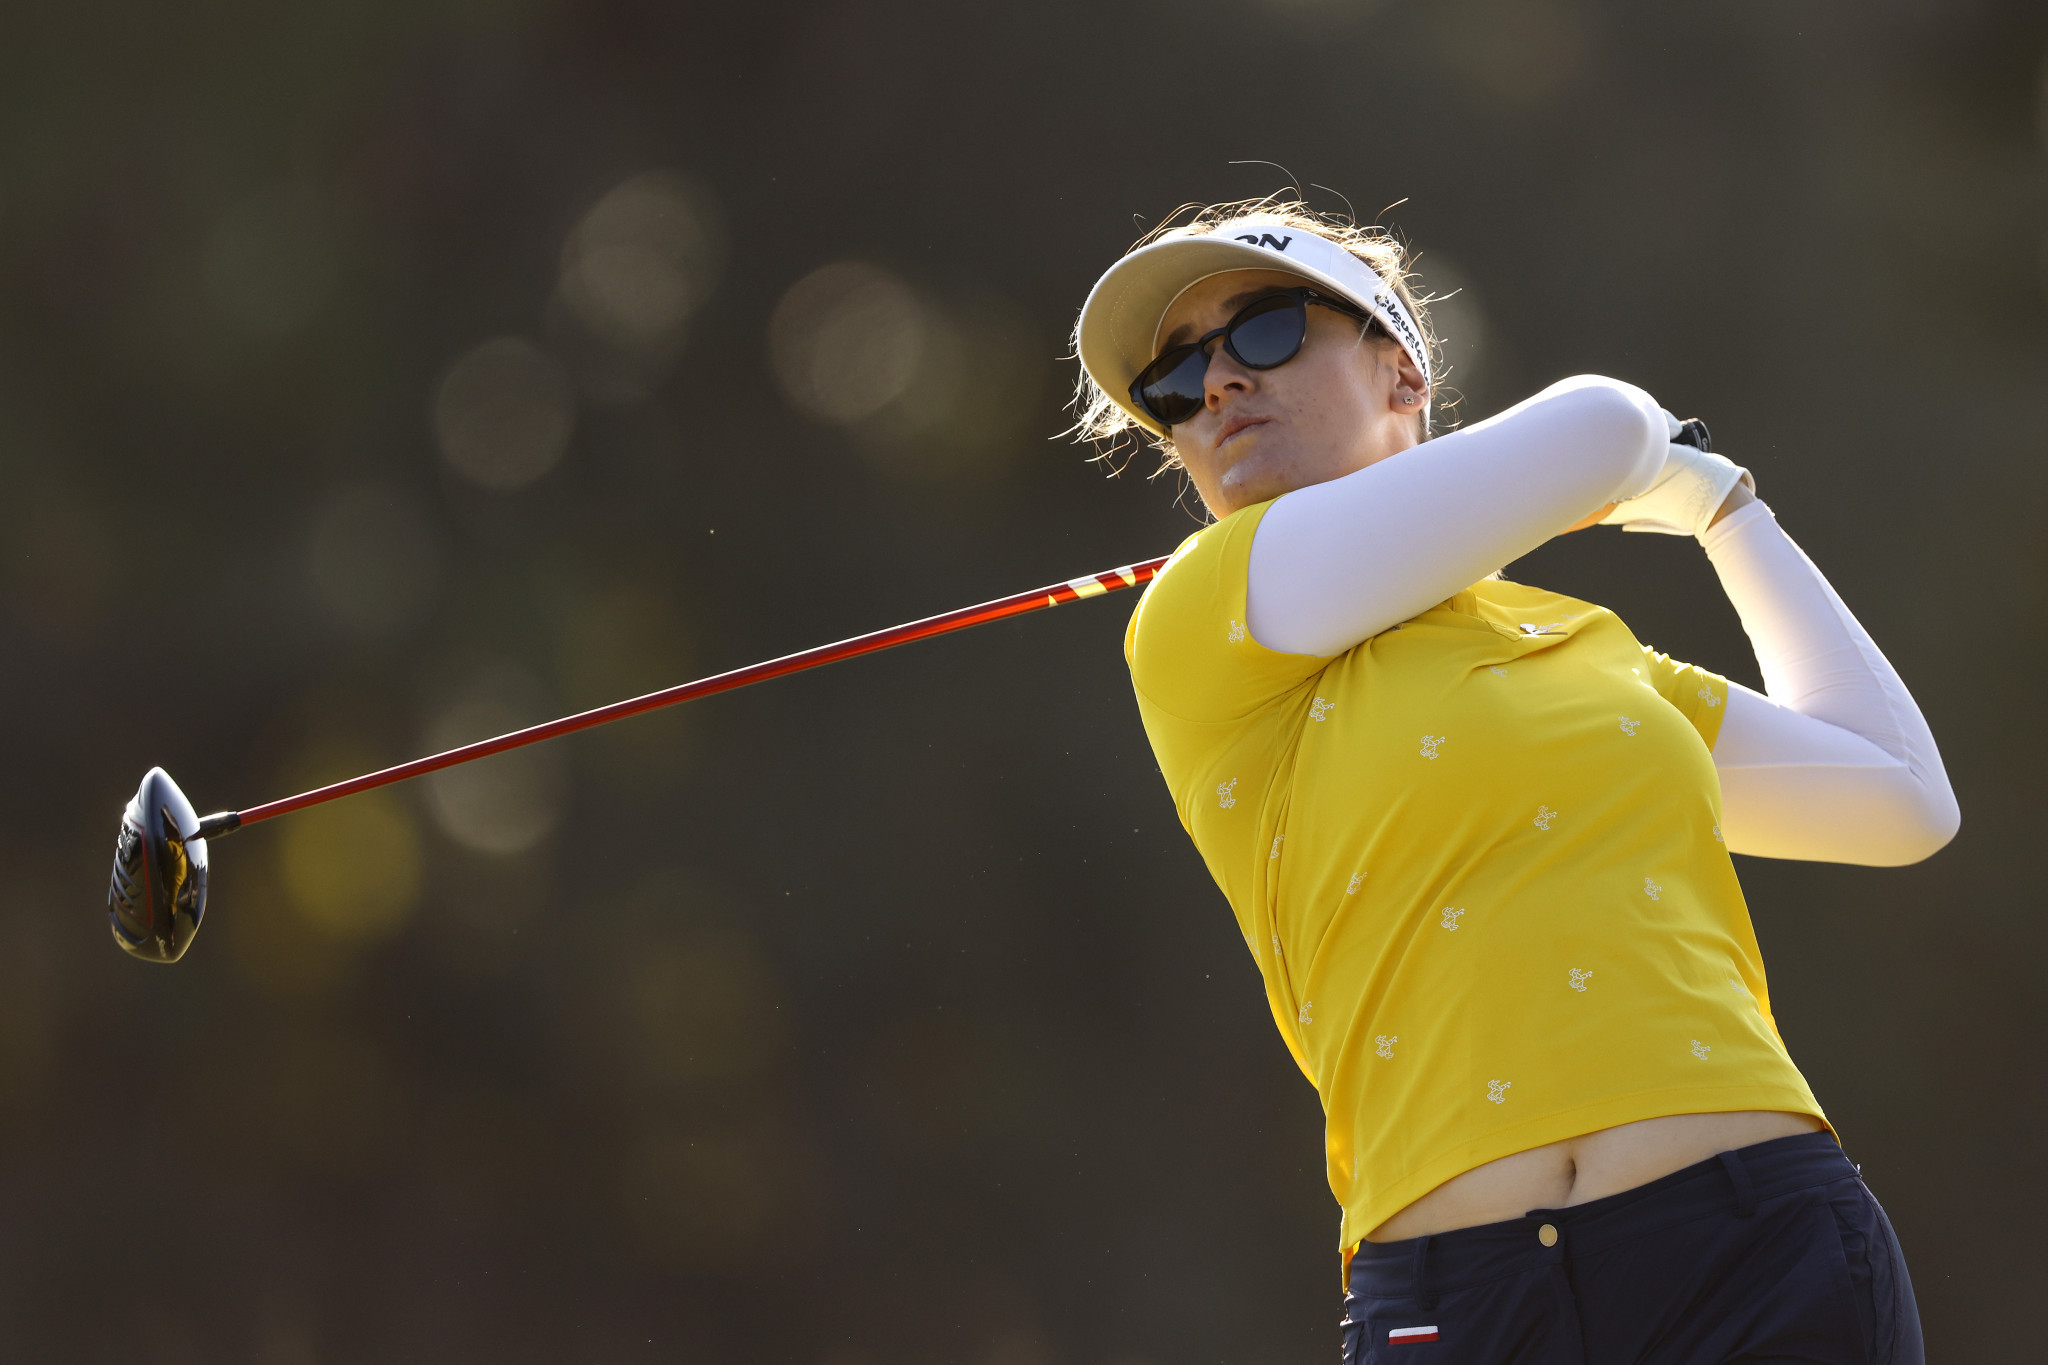 Australia's Hannah Green finished in a tie for second at the LPGA Tour's season ending event in Florida after carding a five-under-par round of 67 on the final day ©Getty Images